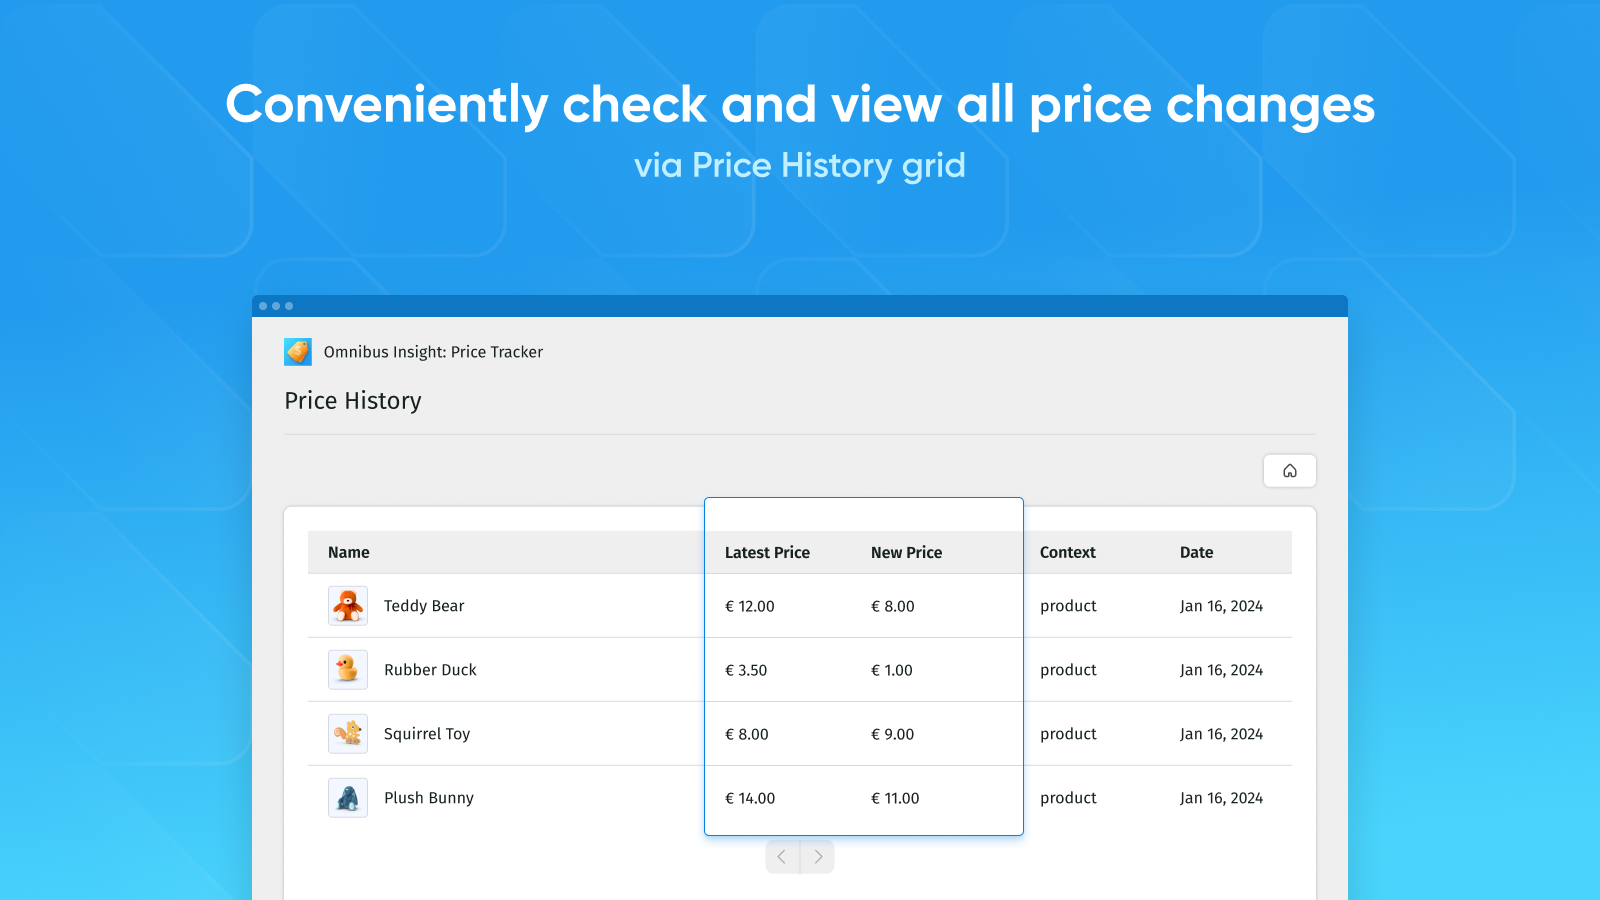 Conveniently check all price changes via Price History grid